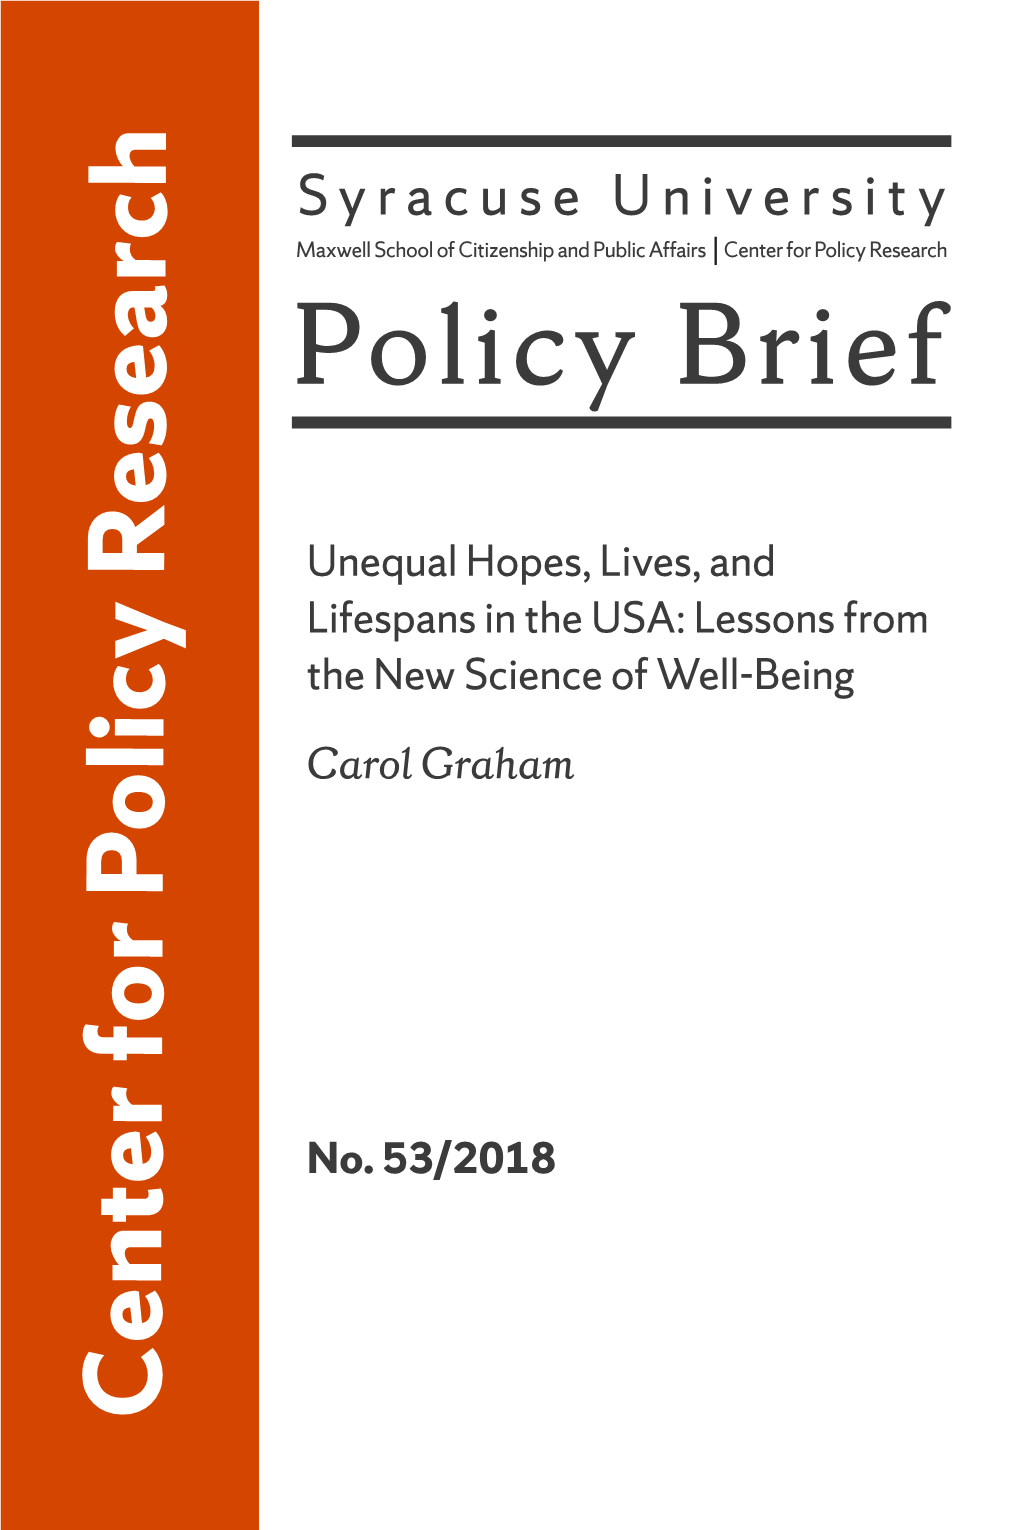 Unequal Hopes, Lives, and Lifespans in the USA: Lessons from the New Science of Well-Being Carol Graham